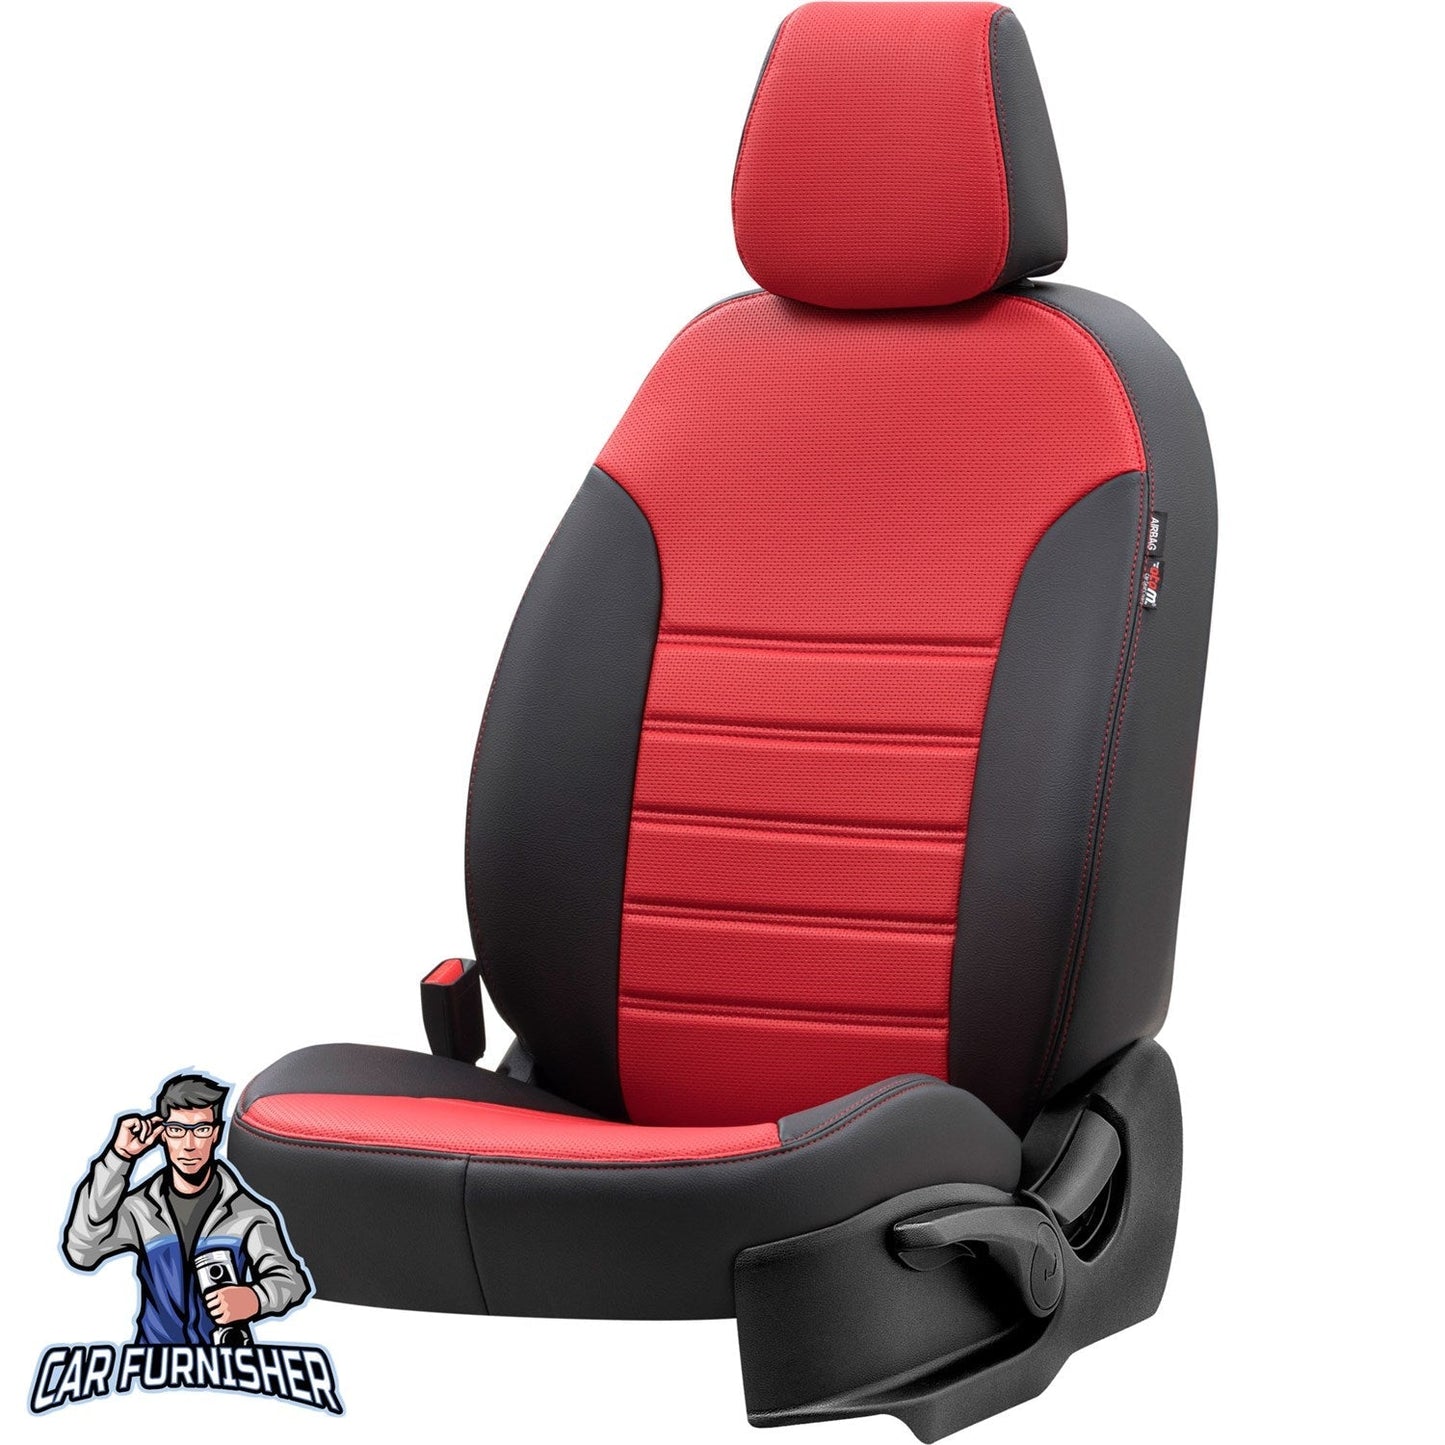 Opel Meriva Seat Covers New York Leather Design Red Leather